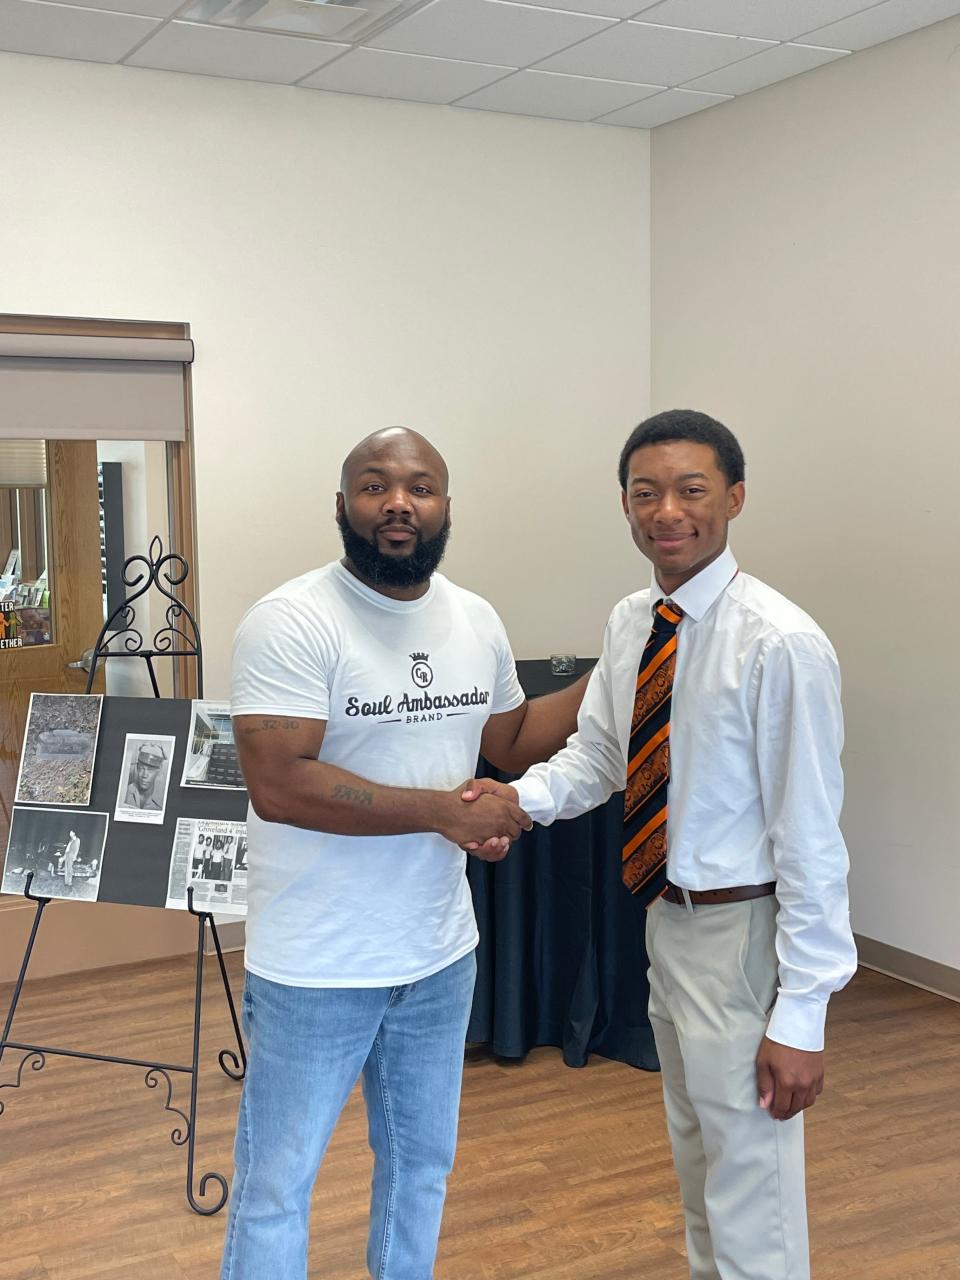 Leesburg High School senior Dencov Bryant being awarded with the Samuel Shepherd Memorial Civil Rights Scholarship by the Robinson House Foundation.